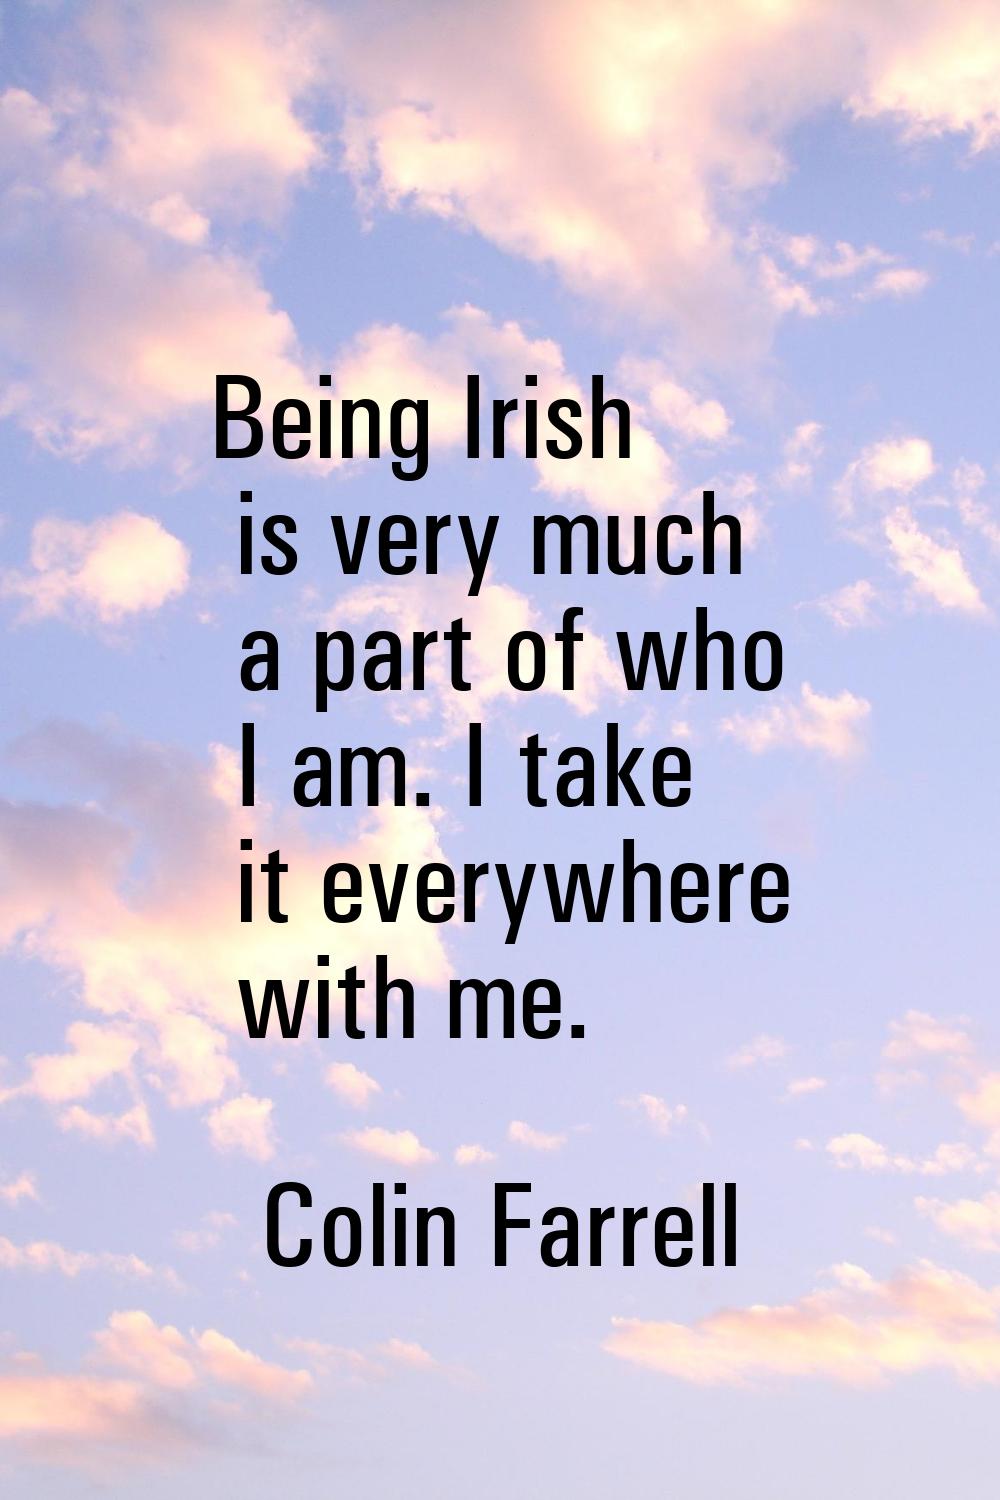 Being Irish is very much a part of who I am. I take it everywhere with me.